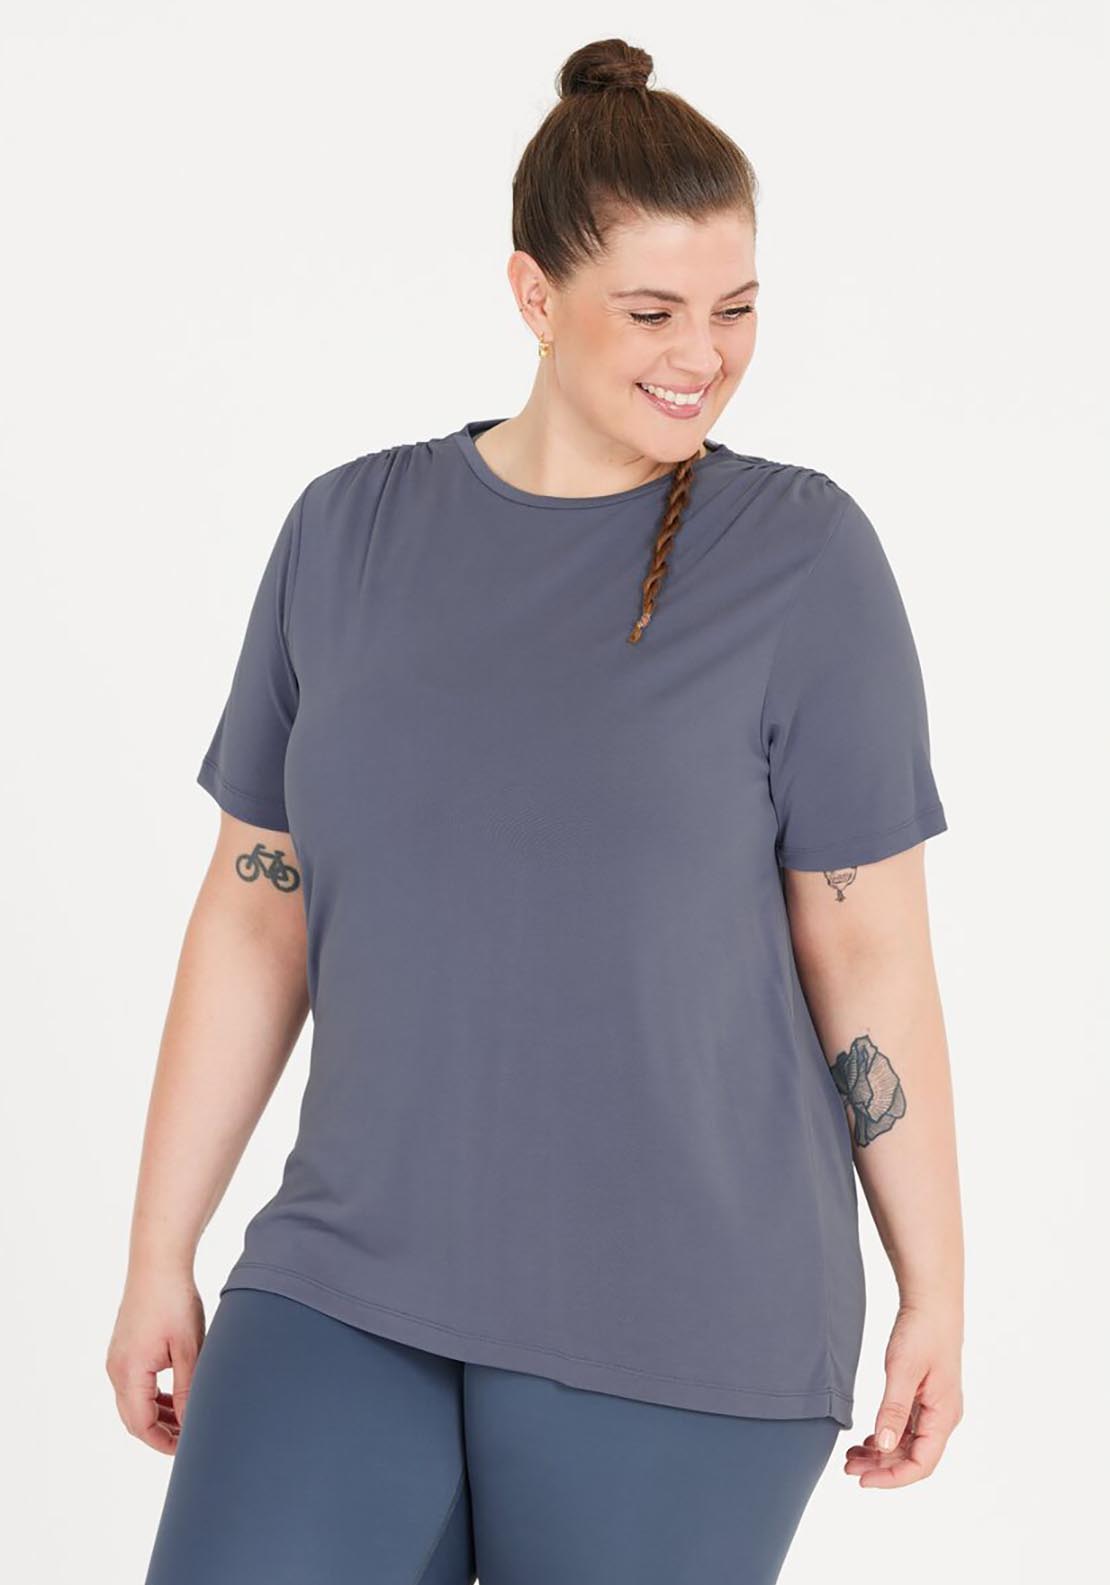 Q Zamilla Womens Loose Fit Short Sleeve Tee 2 Shaws Department Stores